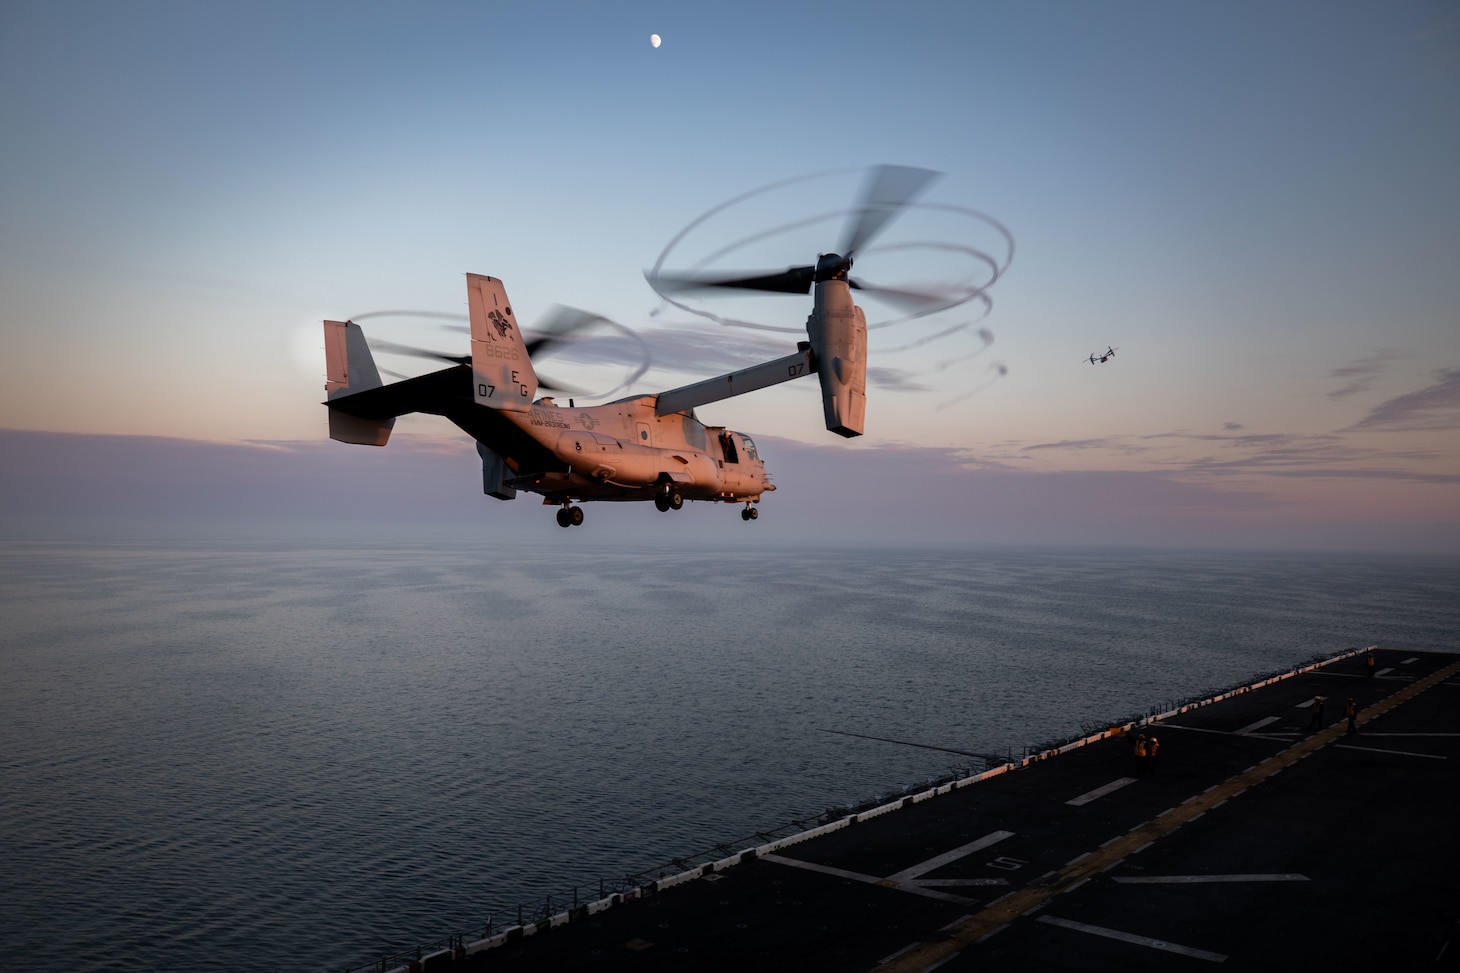 A U.S. Marine Corps MV-22 Osprey, assigned to the Aviation Combat Element, 22nd Marine Expeditionary Unit, takes-off during flight operations aboard the Wasp-class amphibious assault ship USS Kearsarge (LHD 3) during exercise BALTOPS 22, June 10, 2022. BALTOPS 22 is the premier maritime-focused exercise in the Baltic Region. The exercise, led by U.S. Naval forces Europe-Africa, and executed by Naval Striking and Support Forces NATO, provides a unique training opportunity to strengthen combined response capabilities critical to preserving freedom of navigation and security in the Baltic Sea.